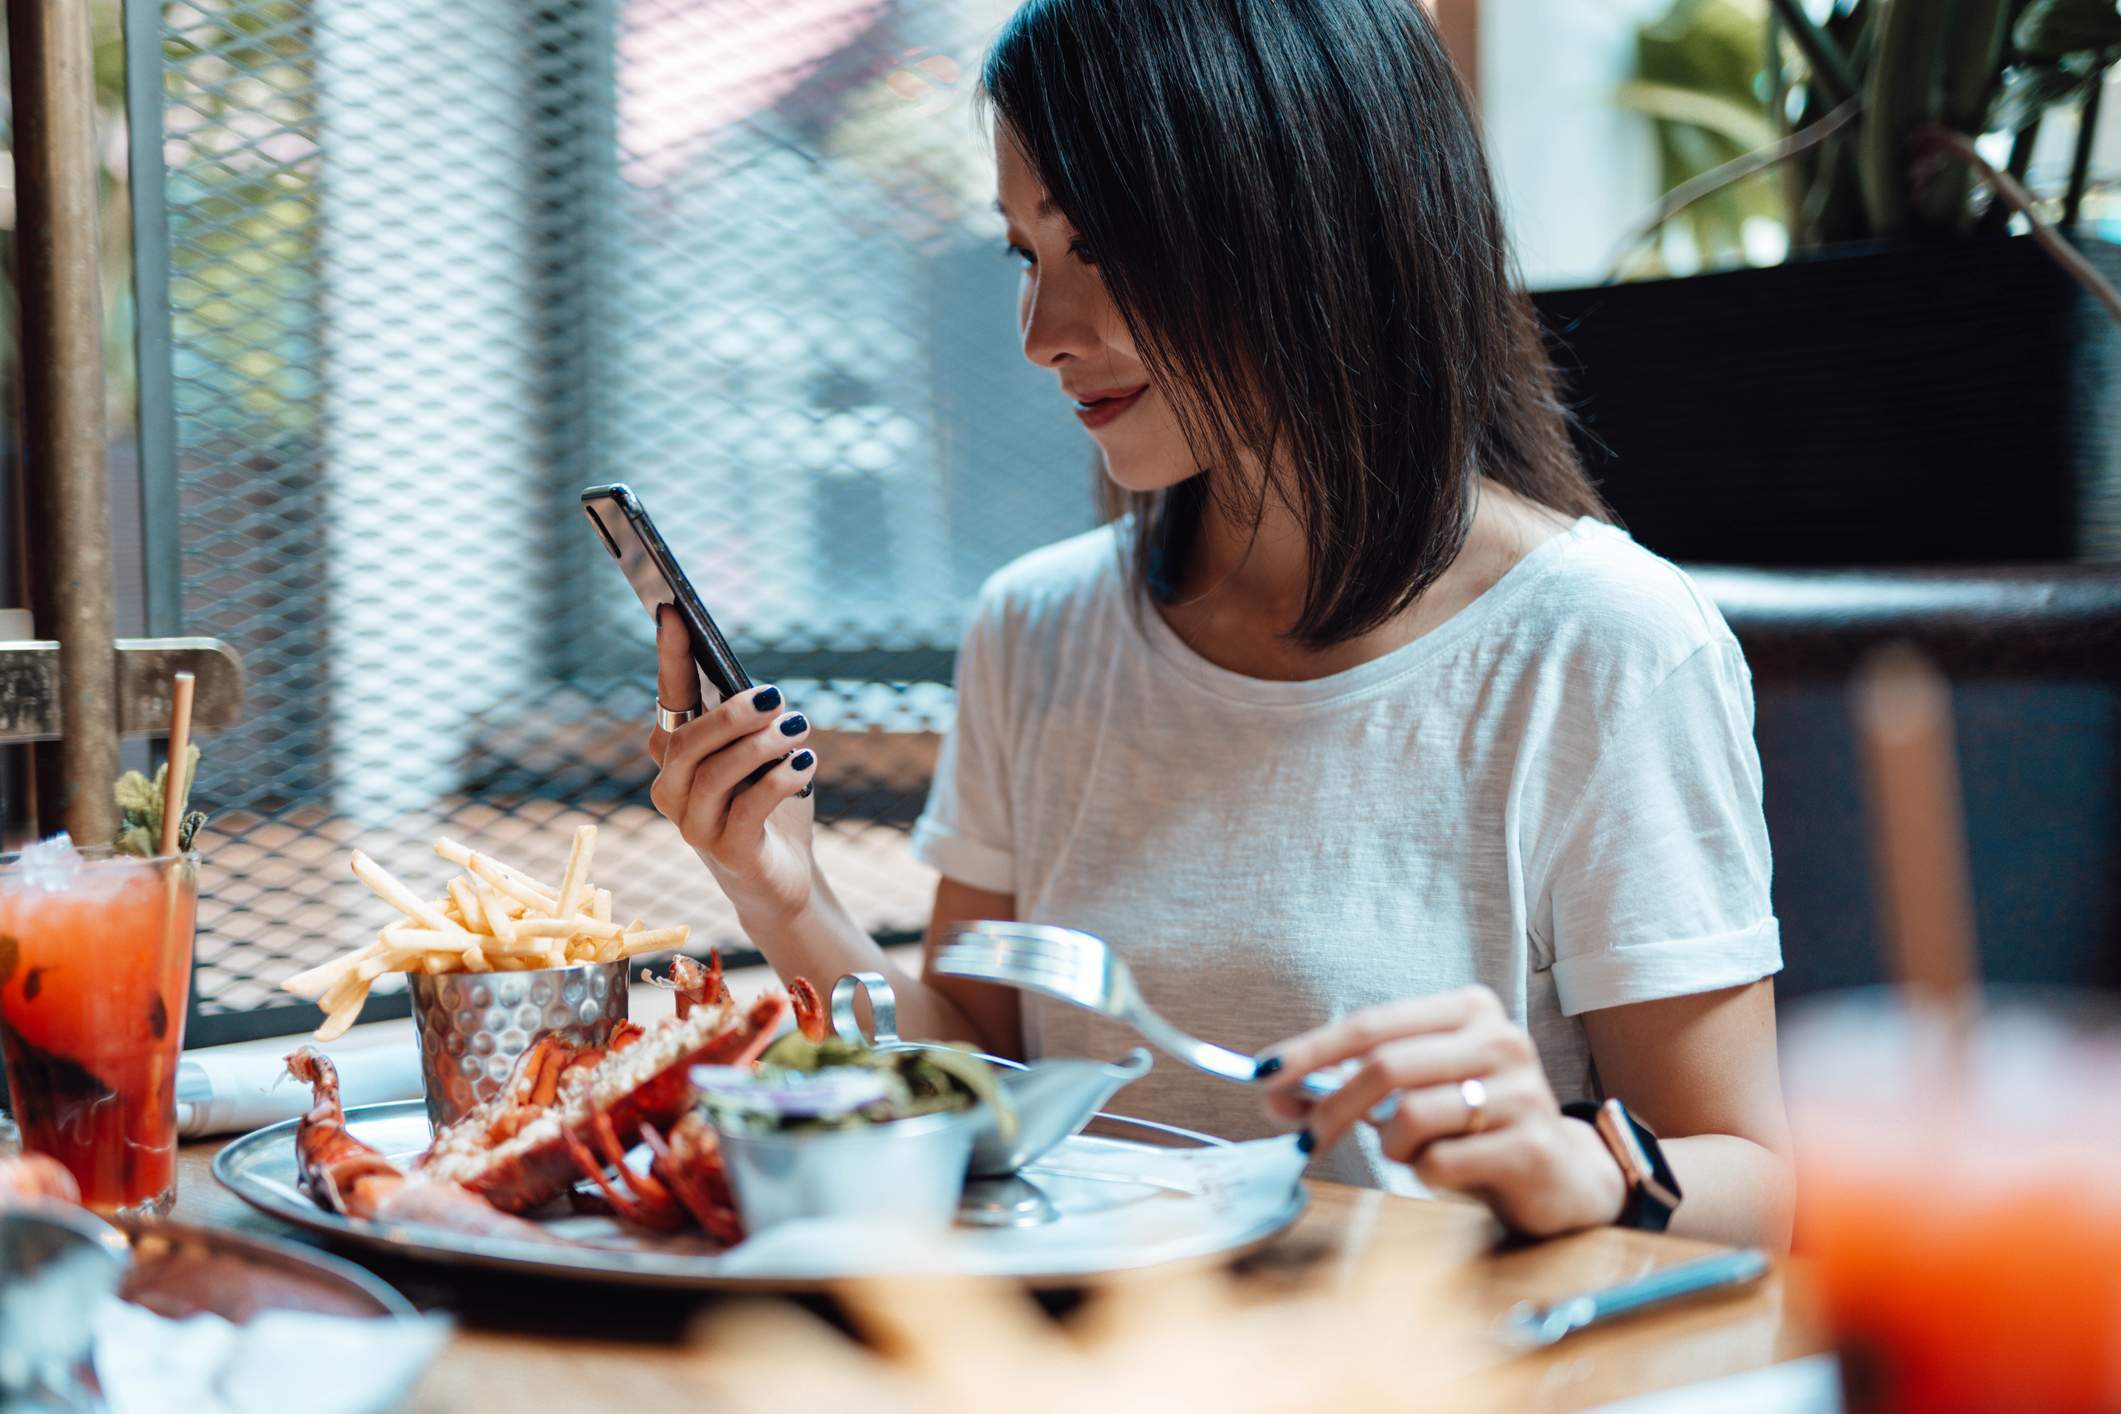 Image depicts a person smiling at their phone while seated at a restaurant. There is a colorful drink in front of them and a plate of seafood and fries. 